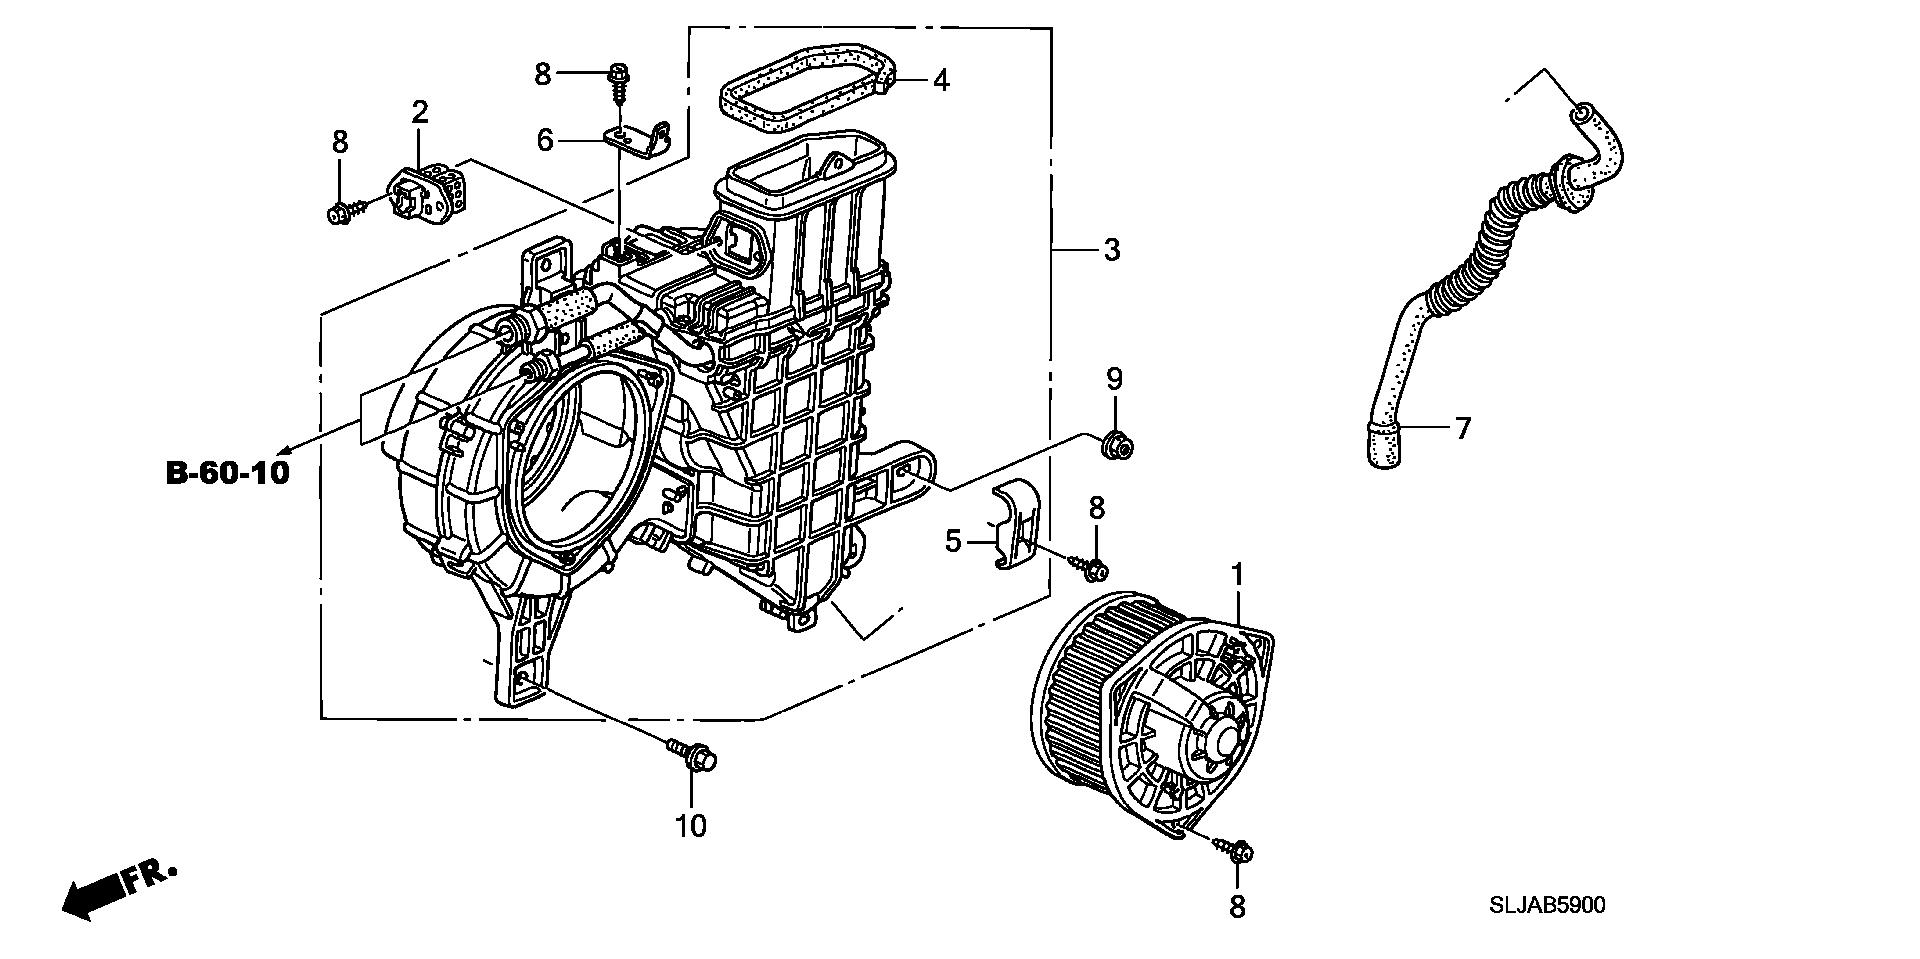 AIR CONDITIONER( REAR COOLING UNIT)